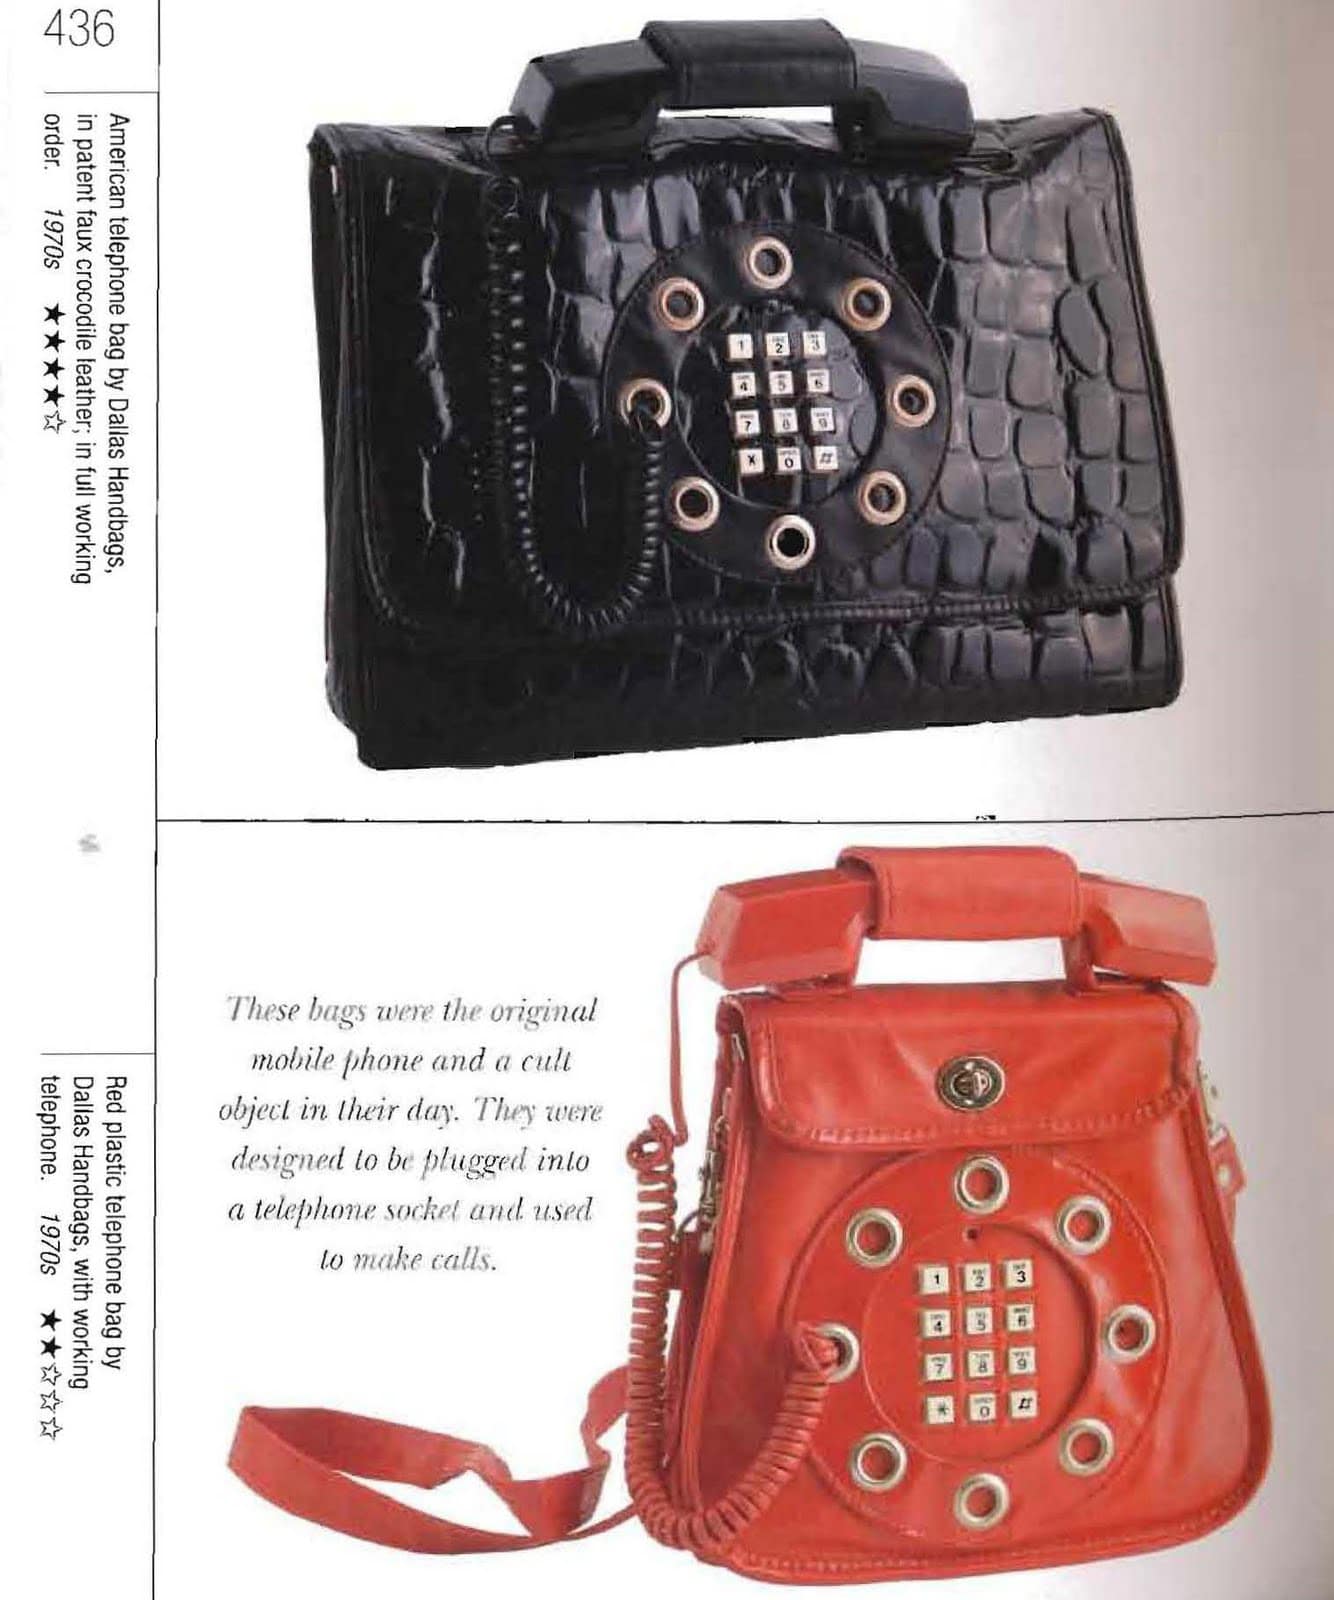 Telephone Bag: Quite Possibly The First Mobile Phone Ever